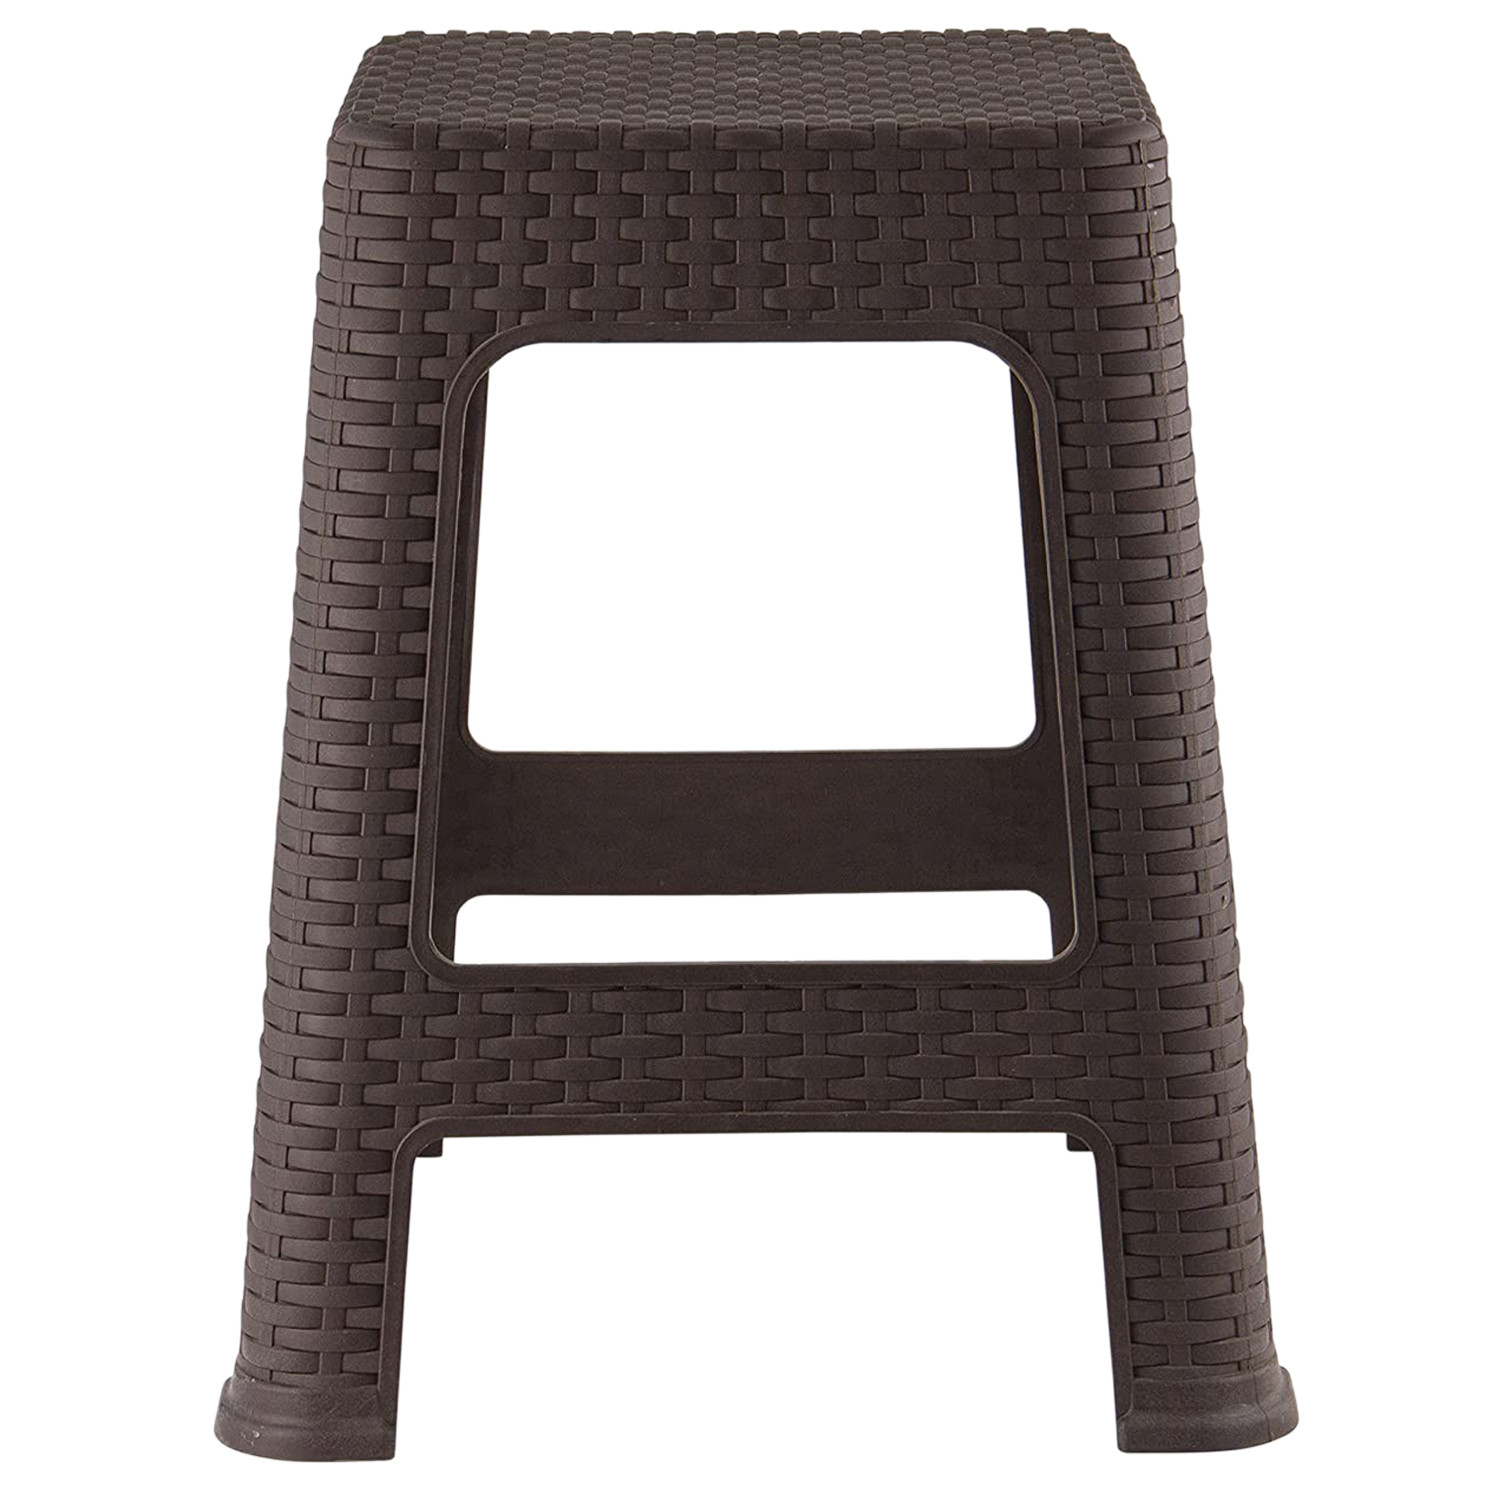 Kuber Industries Multiuses Strong, Durable, Lightweight Plastic Sitting Stool for Indoor/Outdoor Use (Brown)-46KM0519